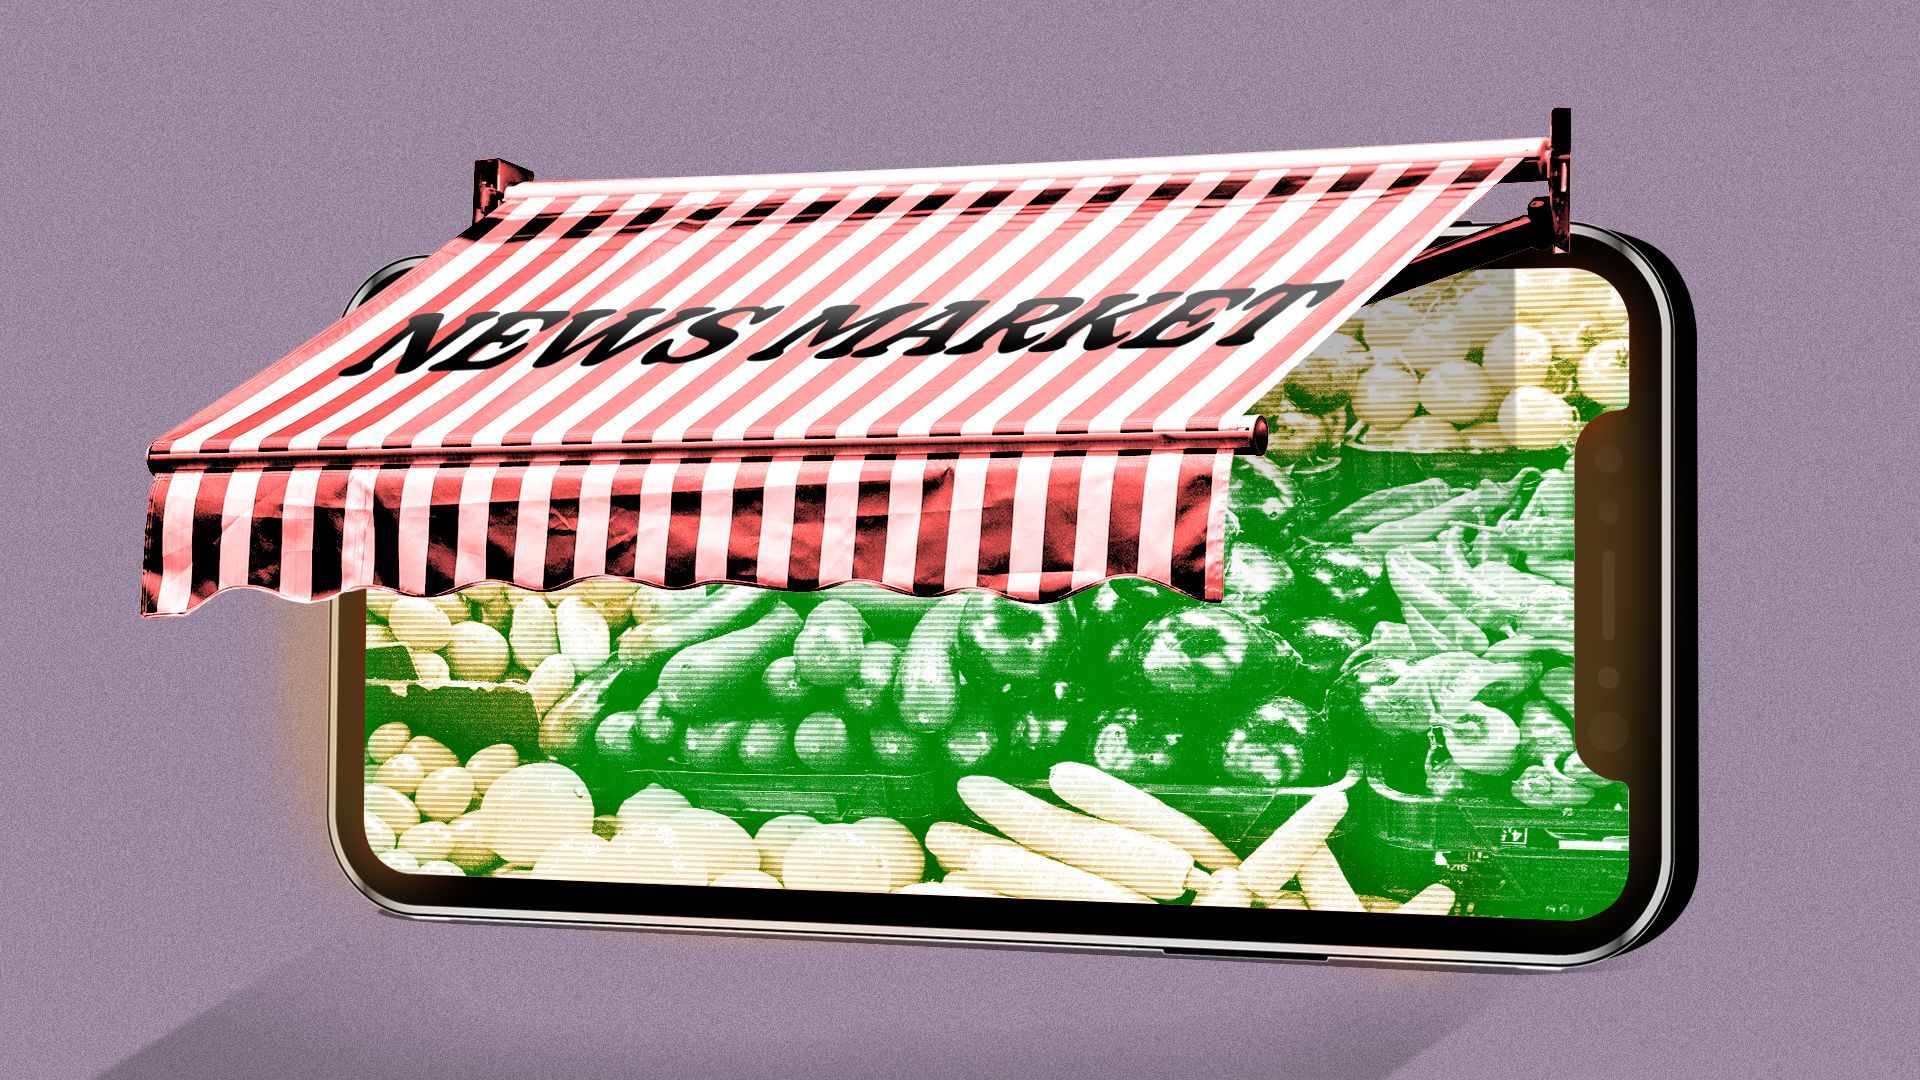 Illustration of a phone with an awning on it reading News Market, showing a photo of vegetables.